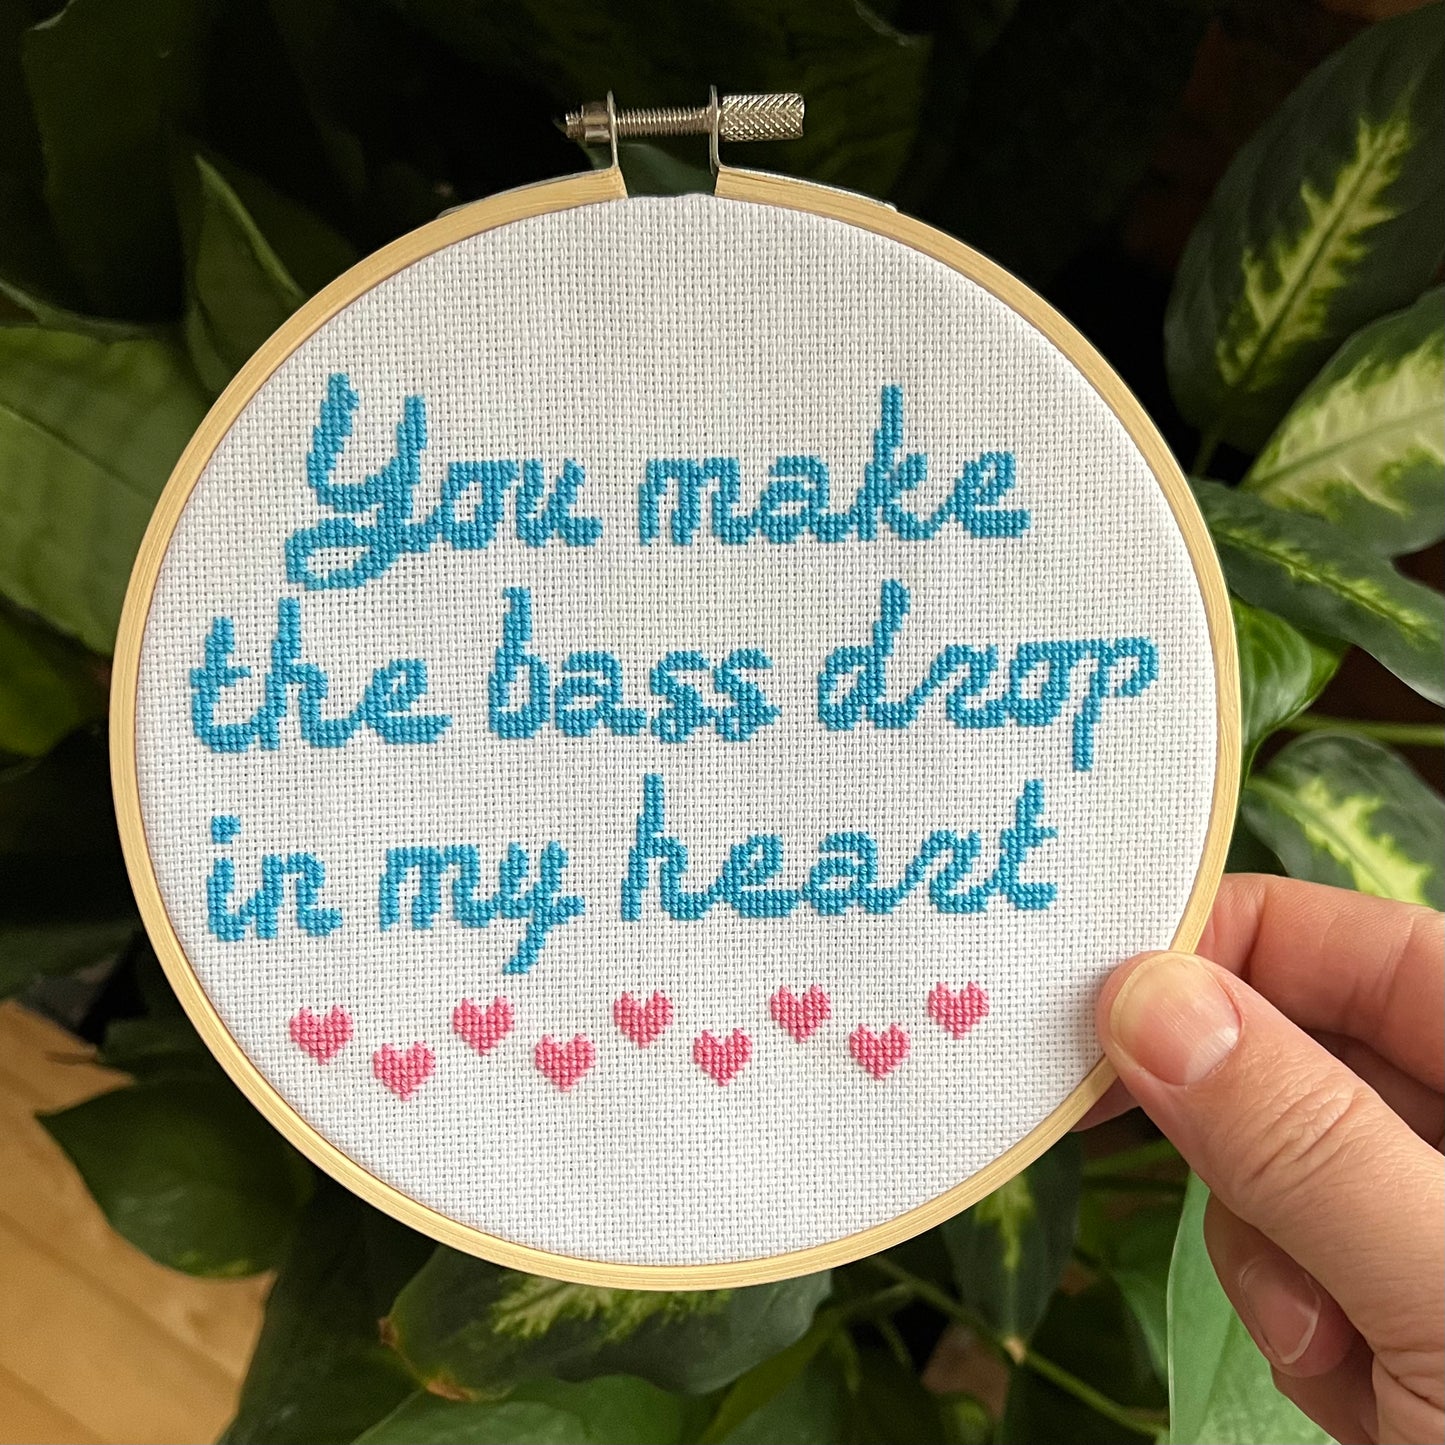 You Make The Bass Drop In My Heart 6” Hand Stitched Cross Stitch Hoop